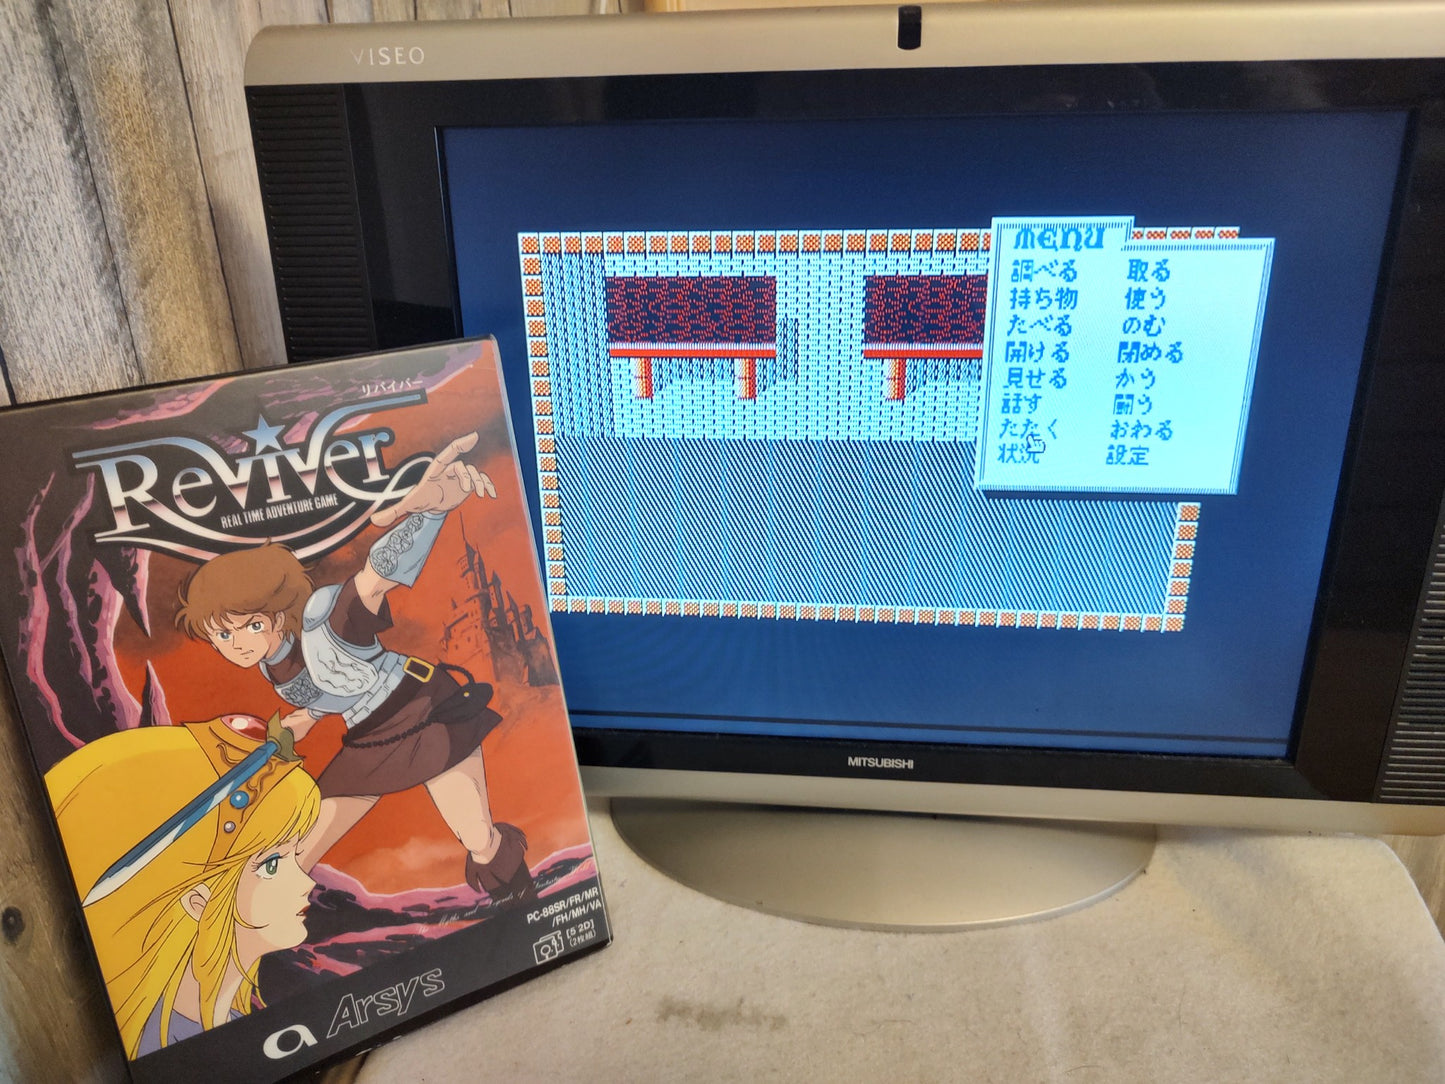 PC-8801 PC88 Reviver Game Disks, Manual, Box set, Working-f0107-